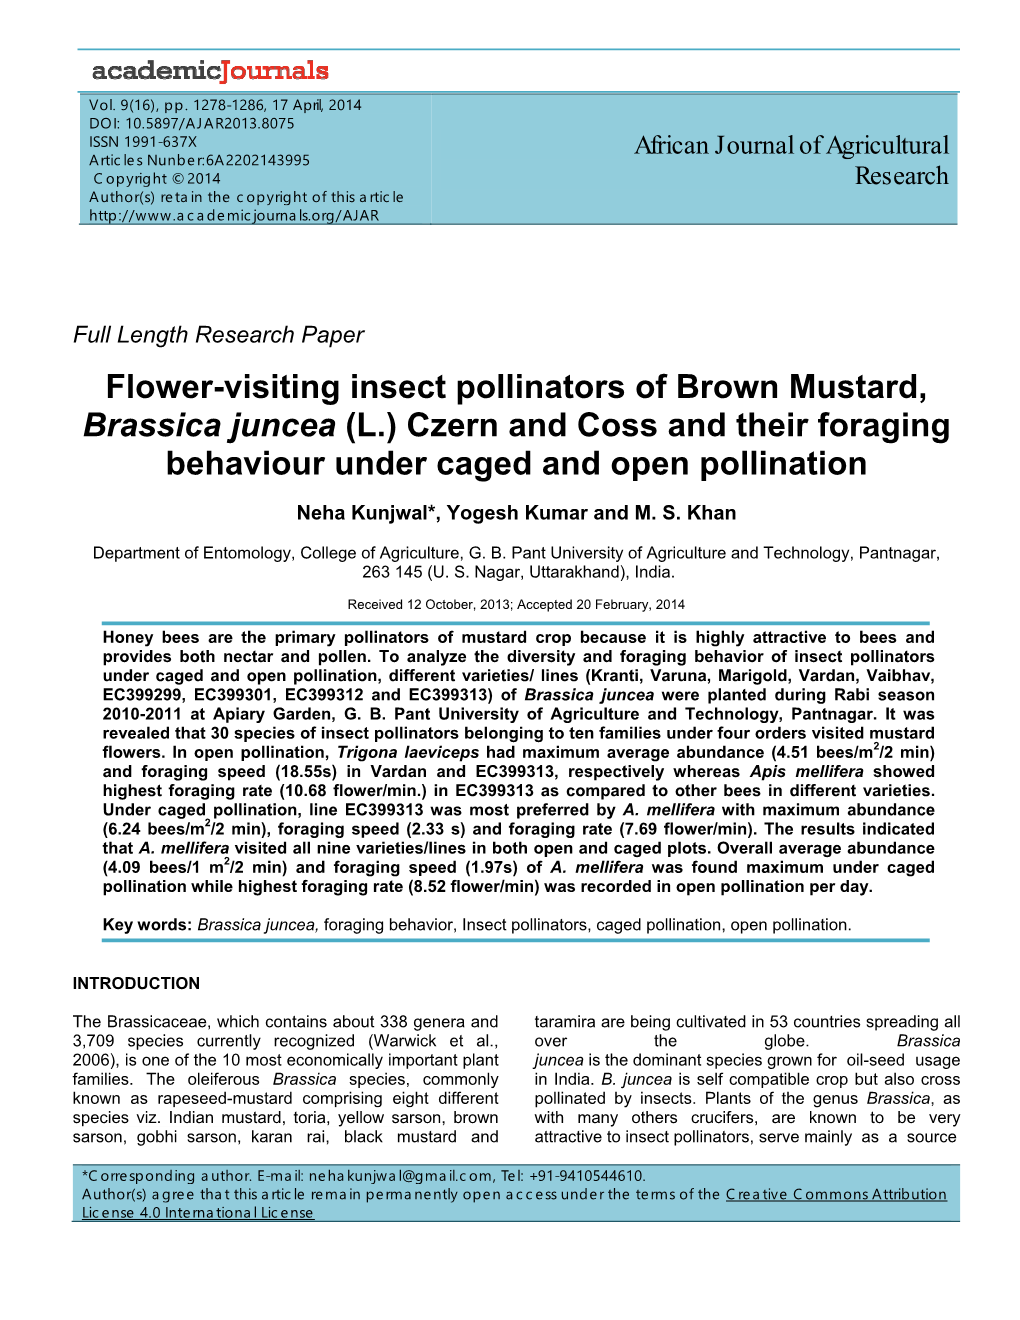 Flower-Visiting Insect Pollinators of Brown Mustard, Brassica Juncea (L.) Czern and Coss and Their Foraging Behaviour Under Caged and Open Pollination